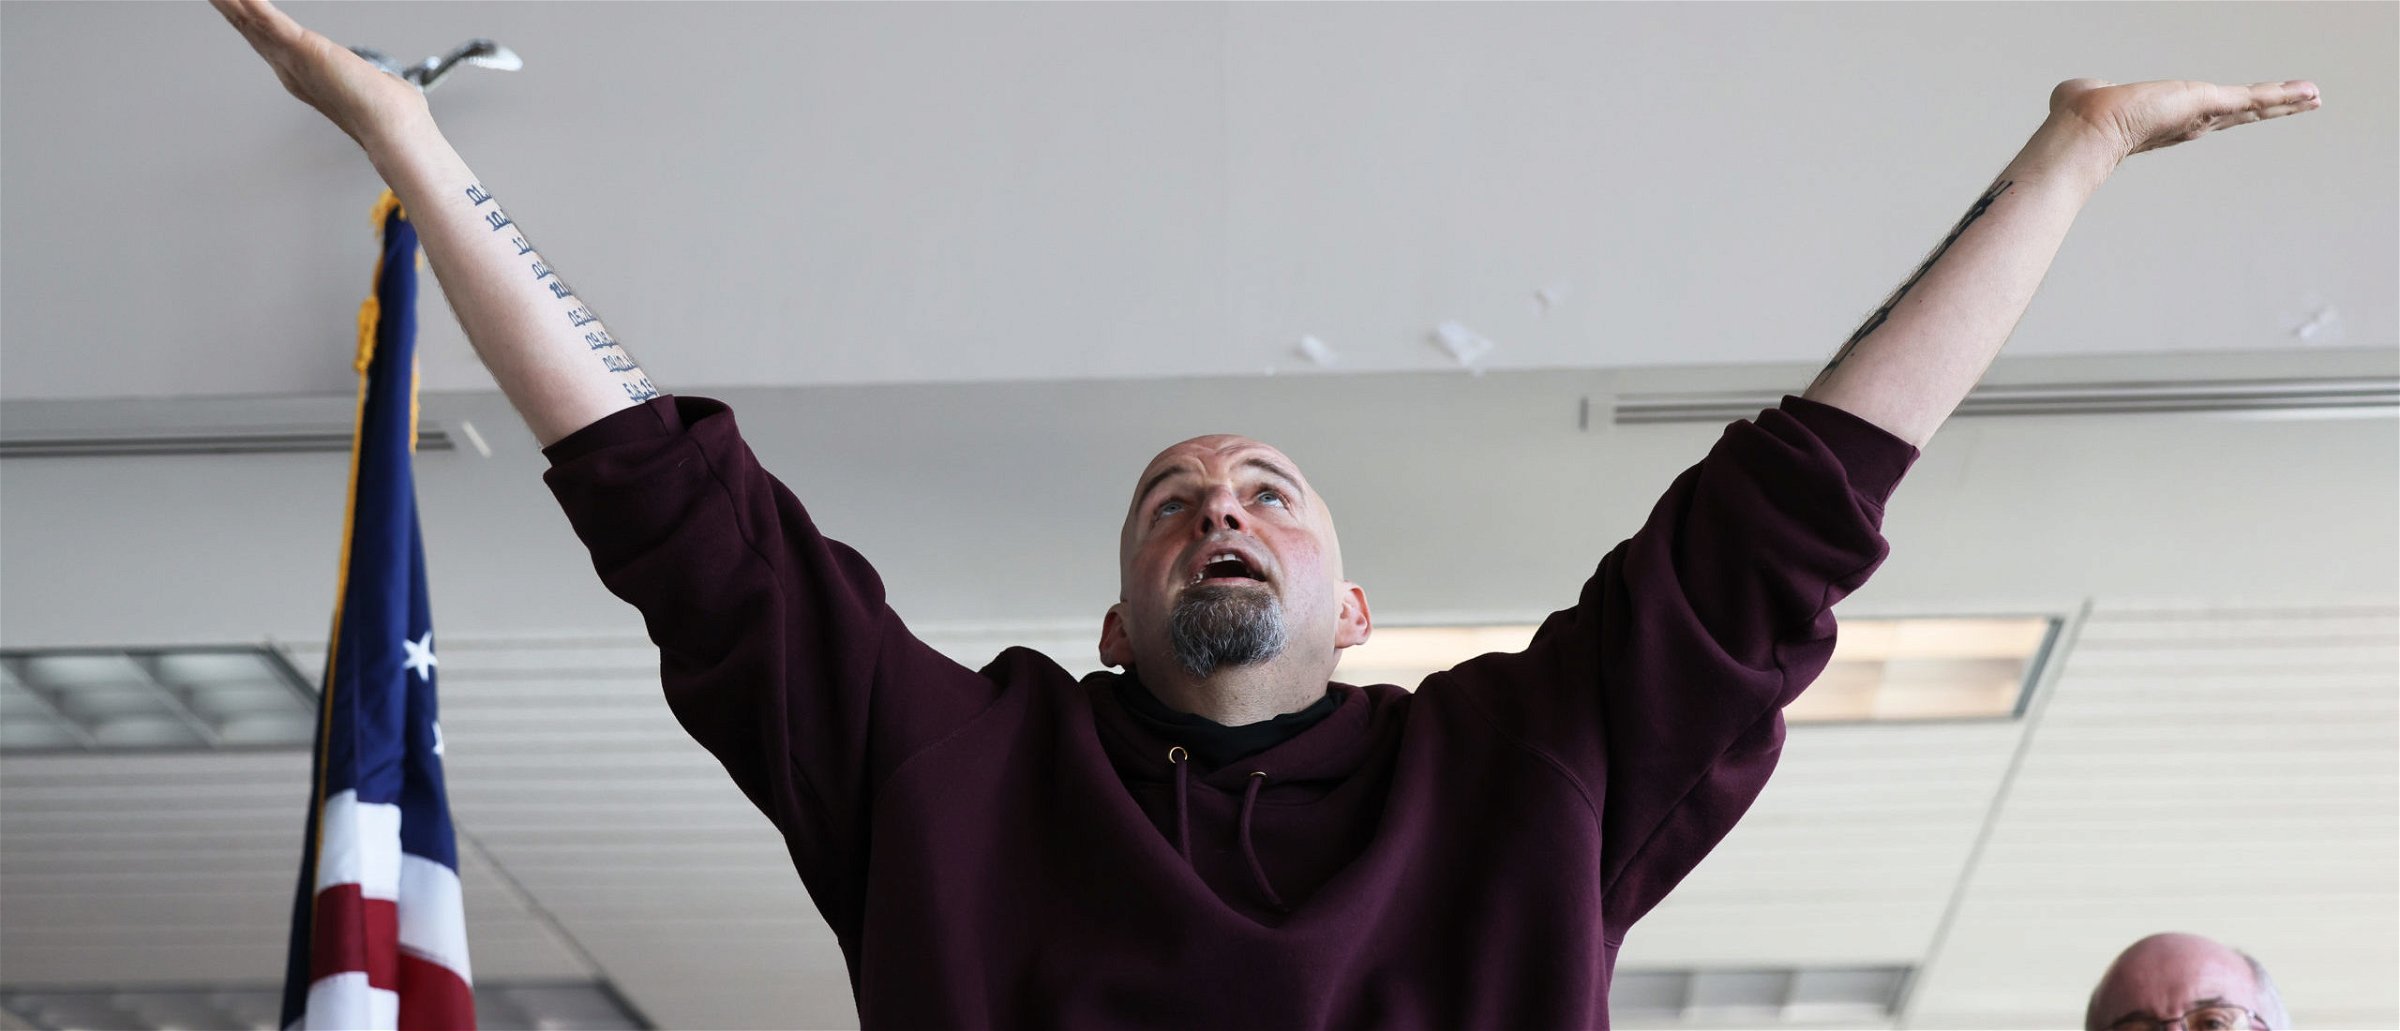 Pennsylvania Lt. Gov. John Fetterman campaigns for U.S. Senate at a meet and greet at Joseph A. Hardy Connellsville Airport on May 10, 2022 in Lemont Furnace, Pennsylvania. Fetterman is the Democratic primary front runner in a field that includes U.S. Rep. Conor Lamb and state Sen. Malcolm Kenyatta in the May 17 primary vying to replace Republican Sen. Pat Toomey, who is retiring. (Photo by Michael M. Santiago/Getty Images)